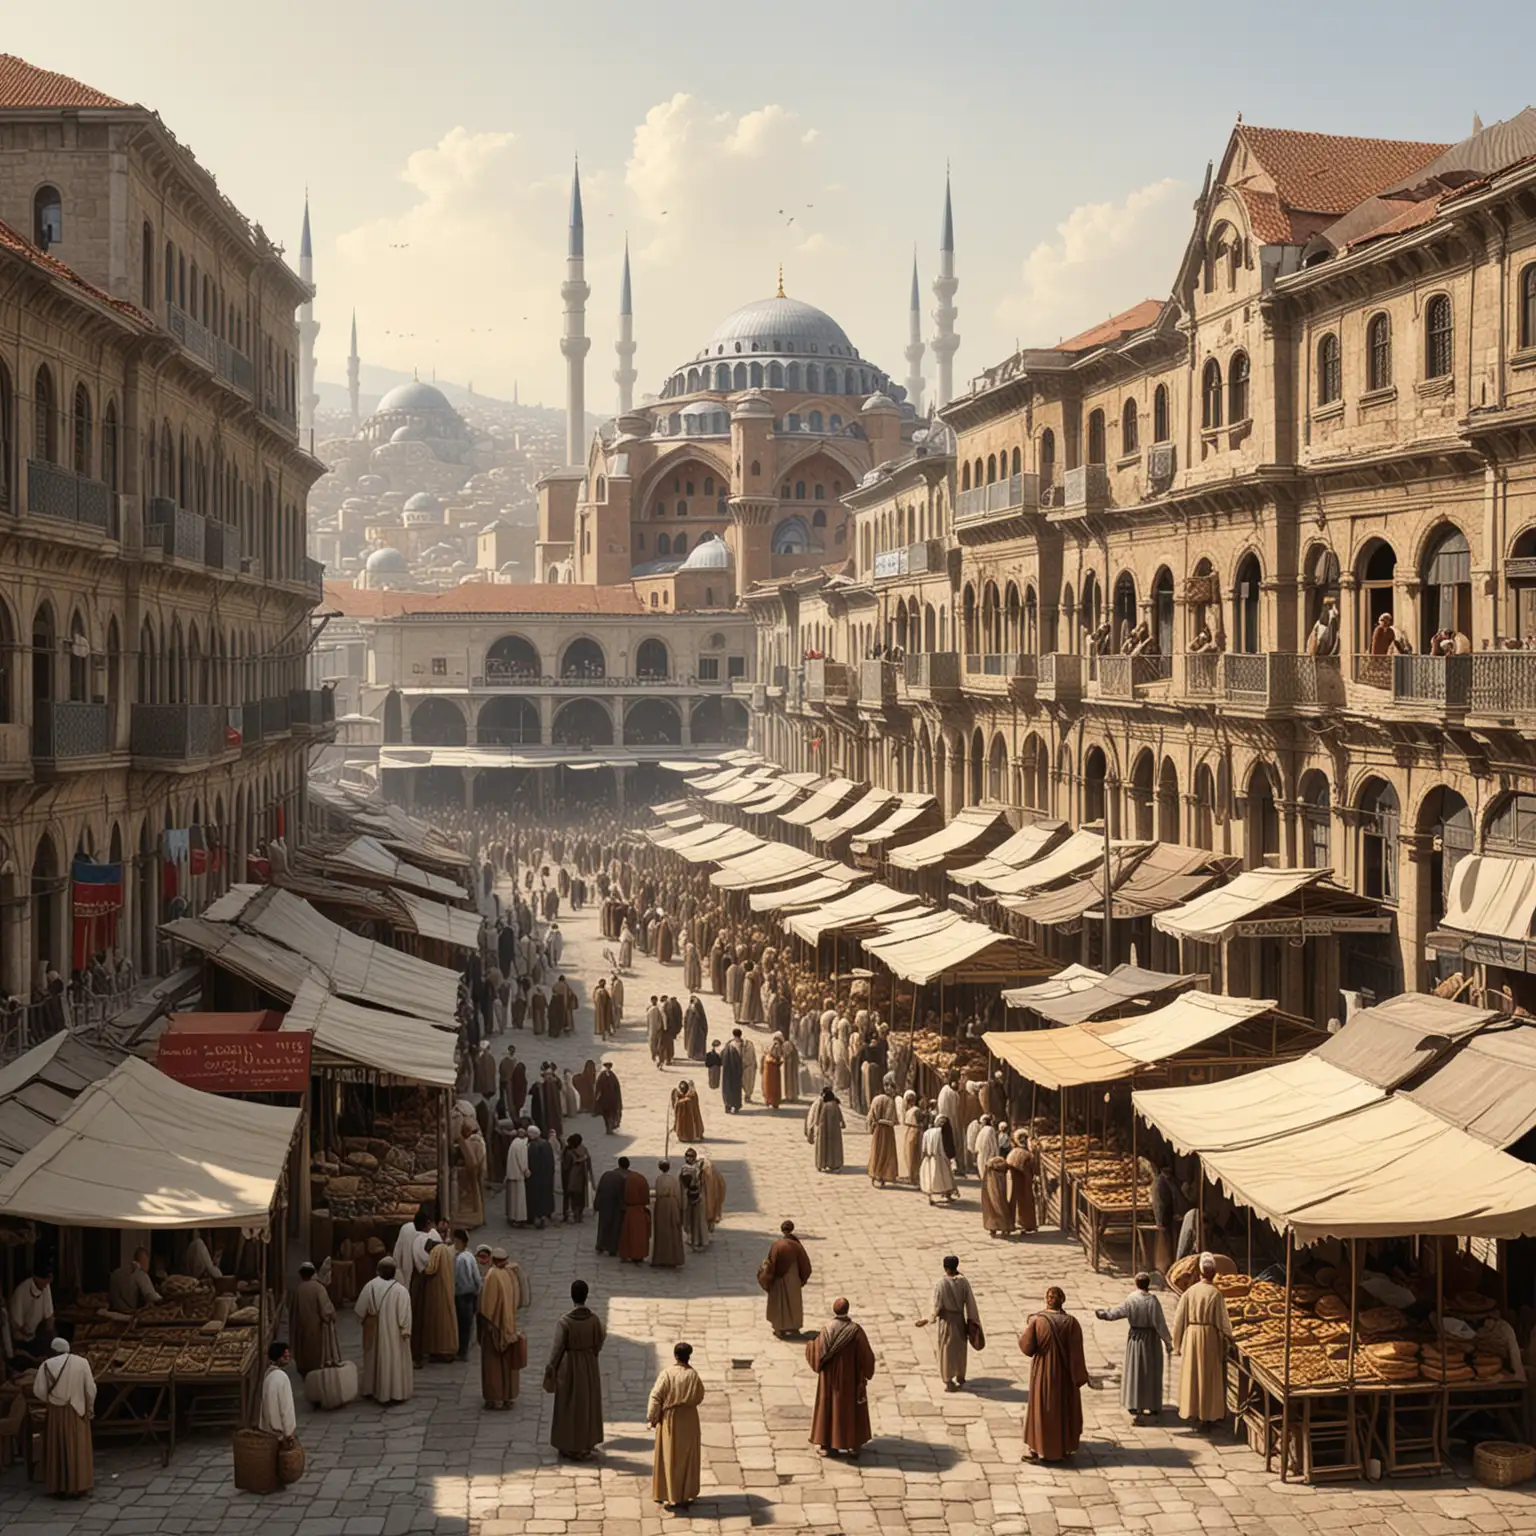 public marketplace in Istanbul in the early 1800s during the byzantine era show the architecture of the city and the people of the time shopping.